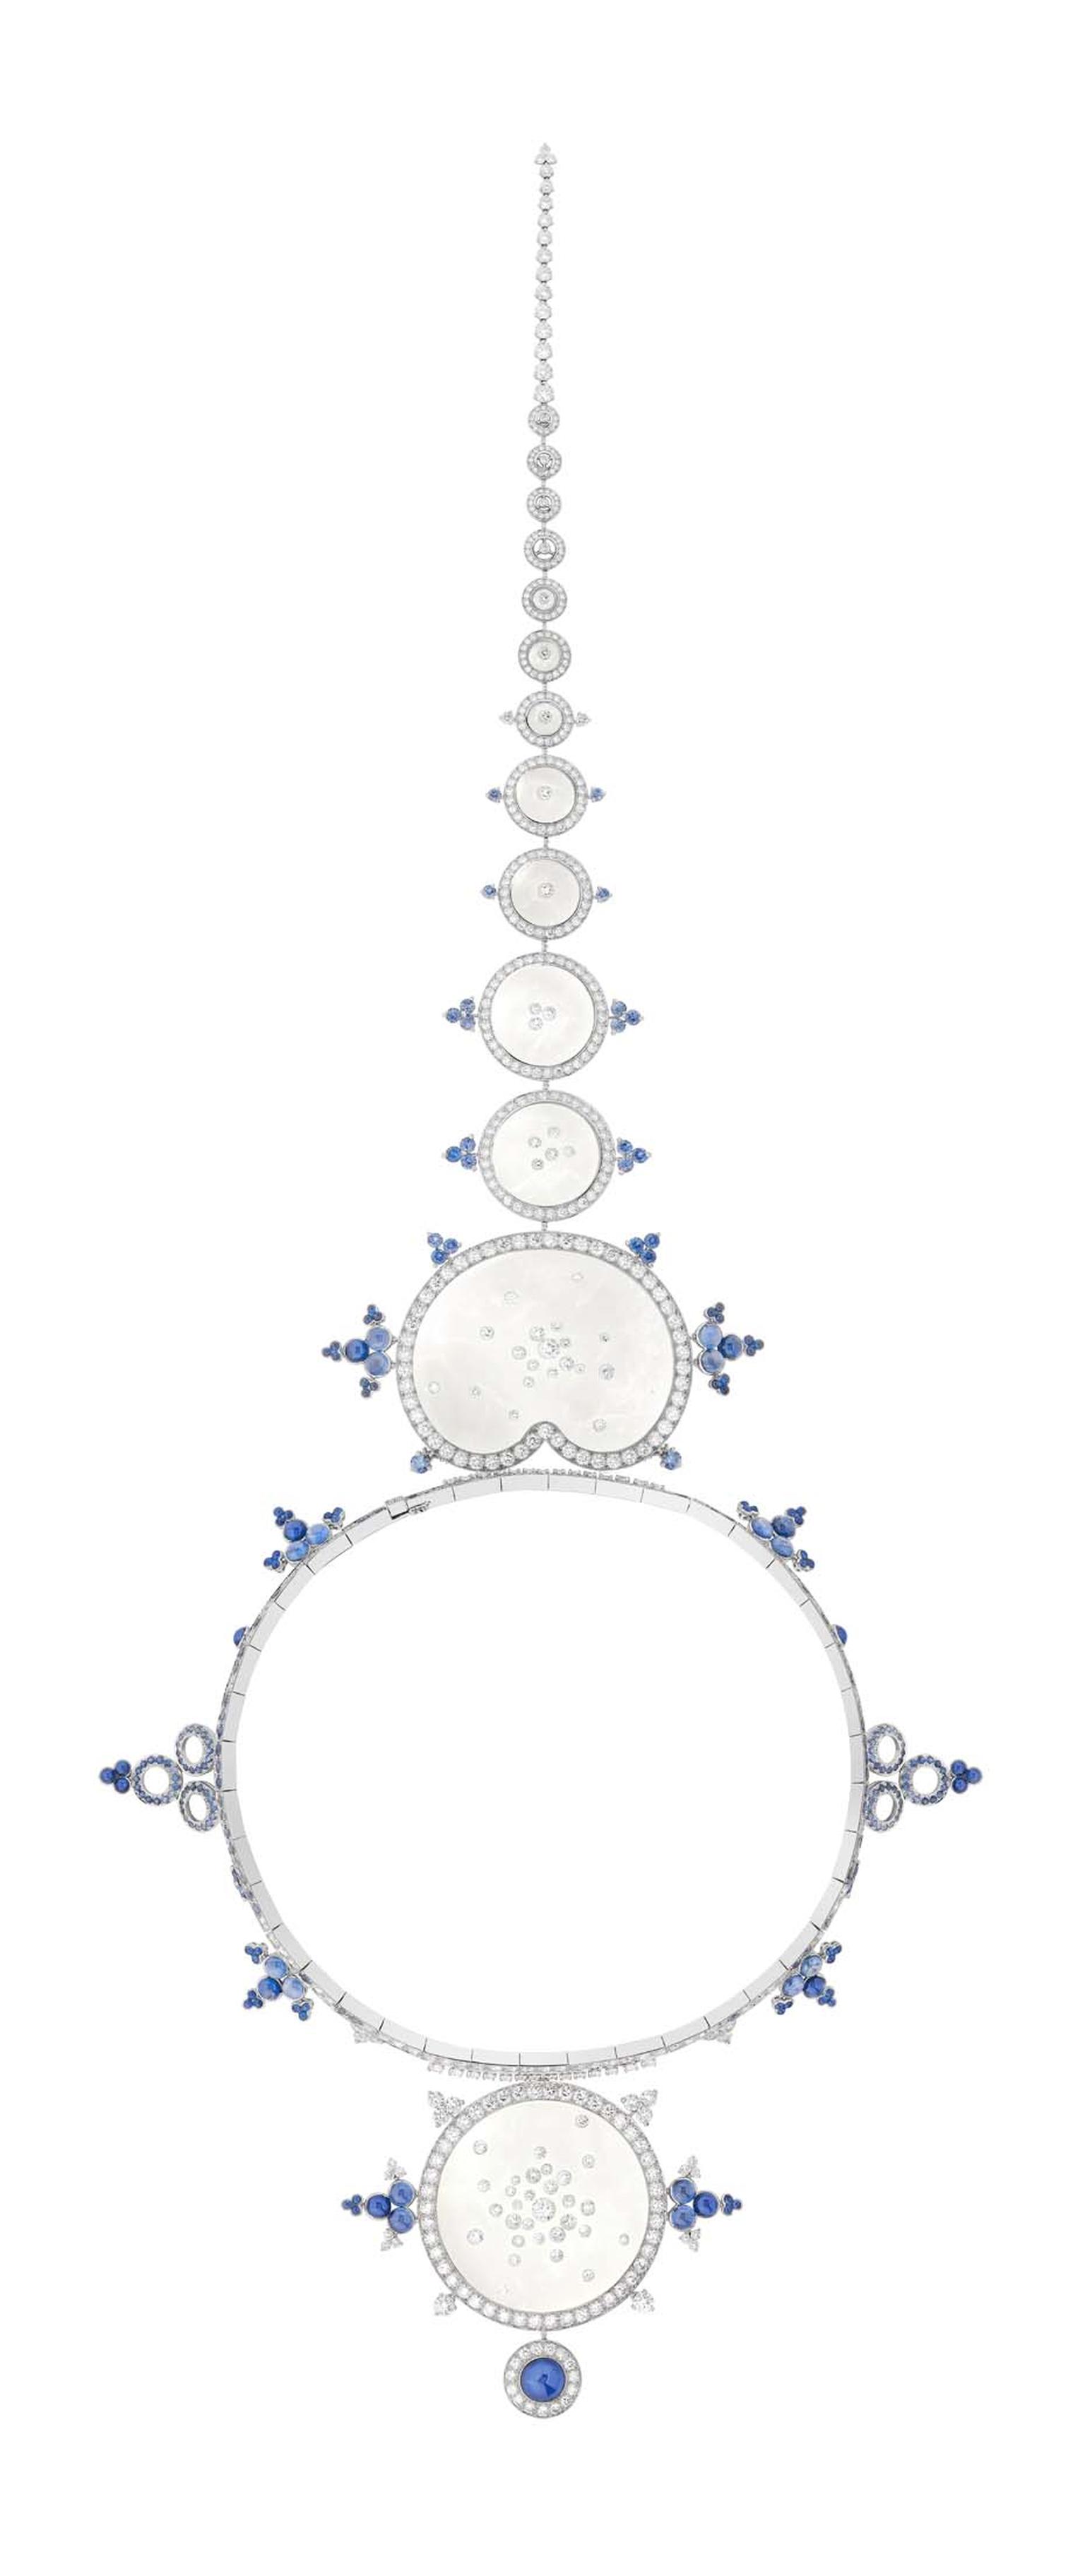 Boucheron Rives du Japan Ricochet brooch with rock cystral, sapphires and diamonds.